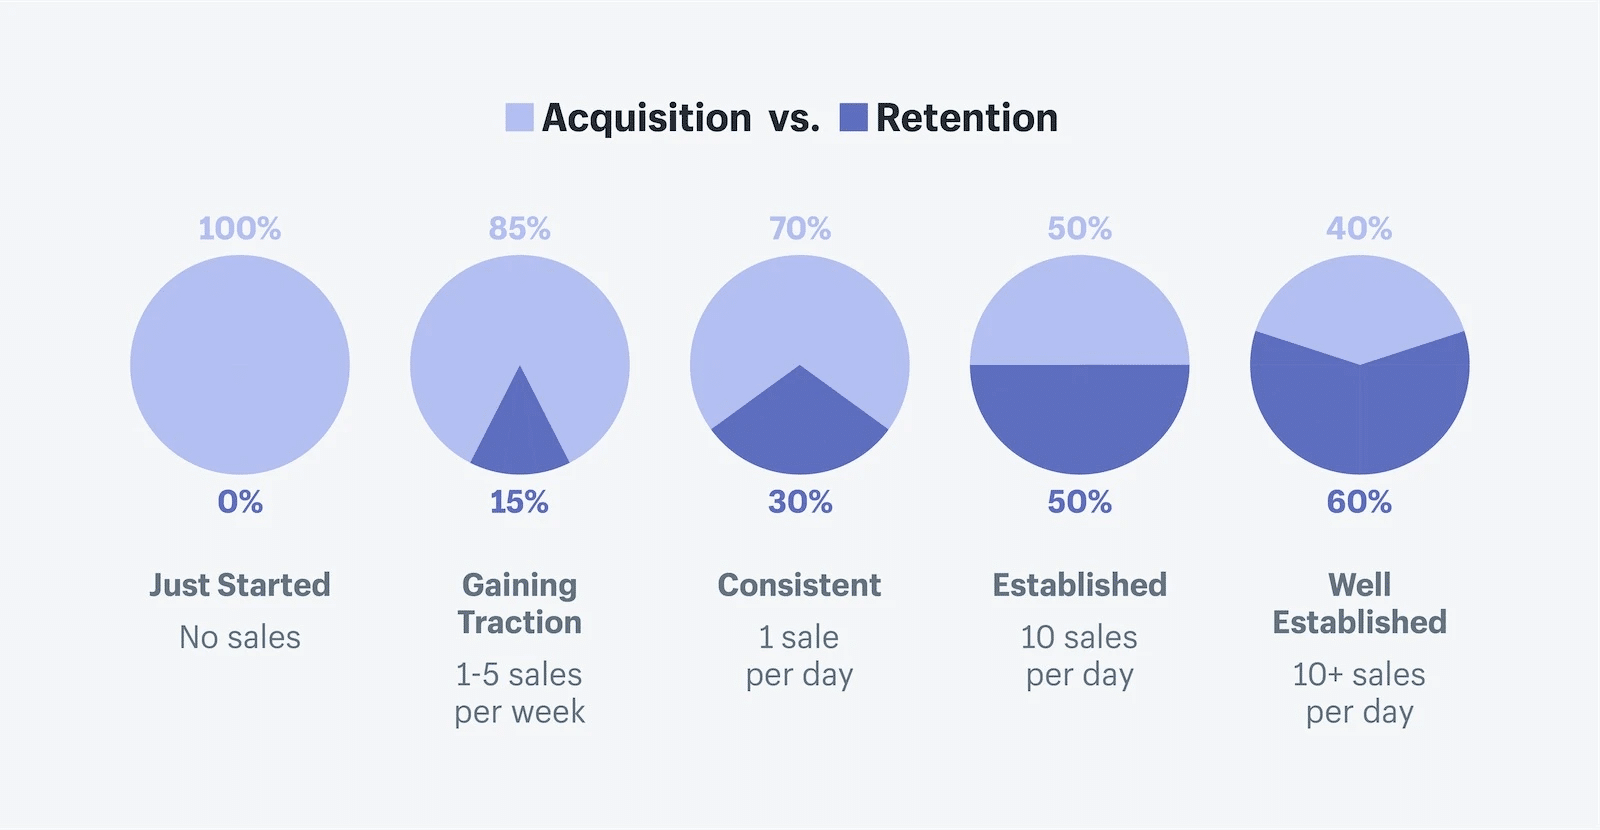 Customer retention strategies: Your guide to the art of keeping your customers coming back-375